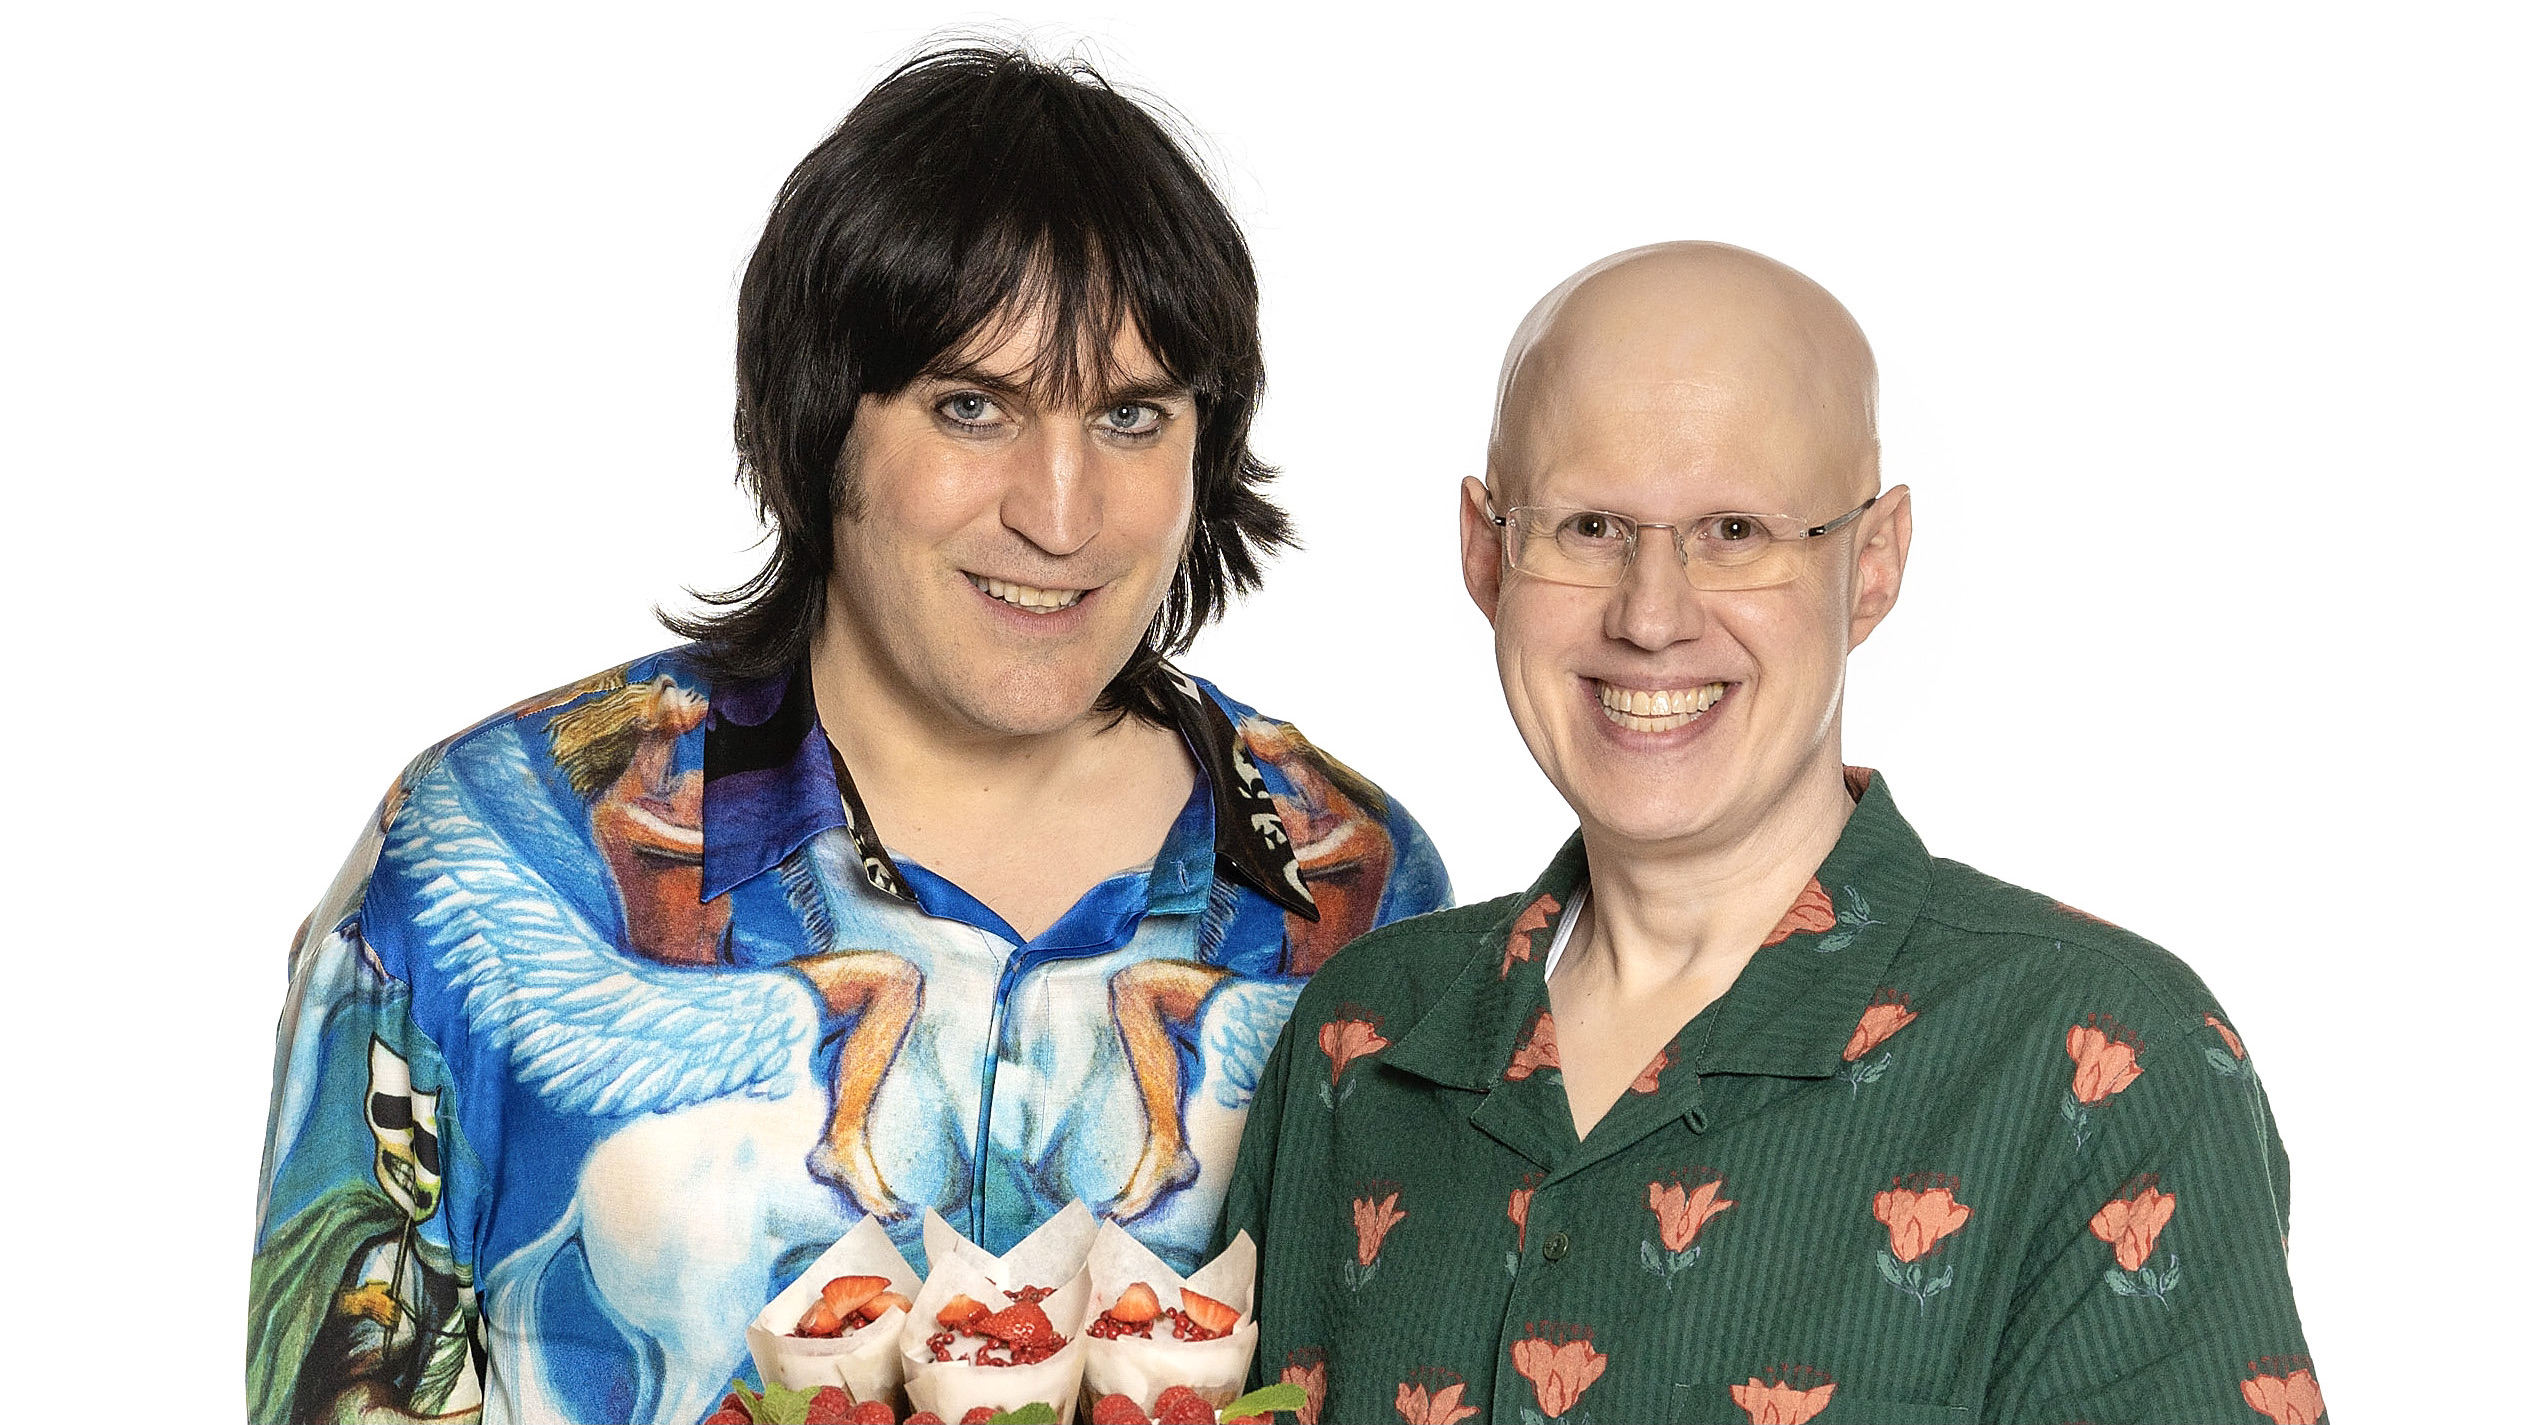 Noel Fielding in a blue printed shirt and Matt Lucas in a green printed shirt hold some strawberry-topped cakes in The Great British Bake Off.